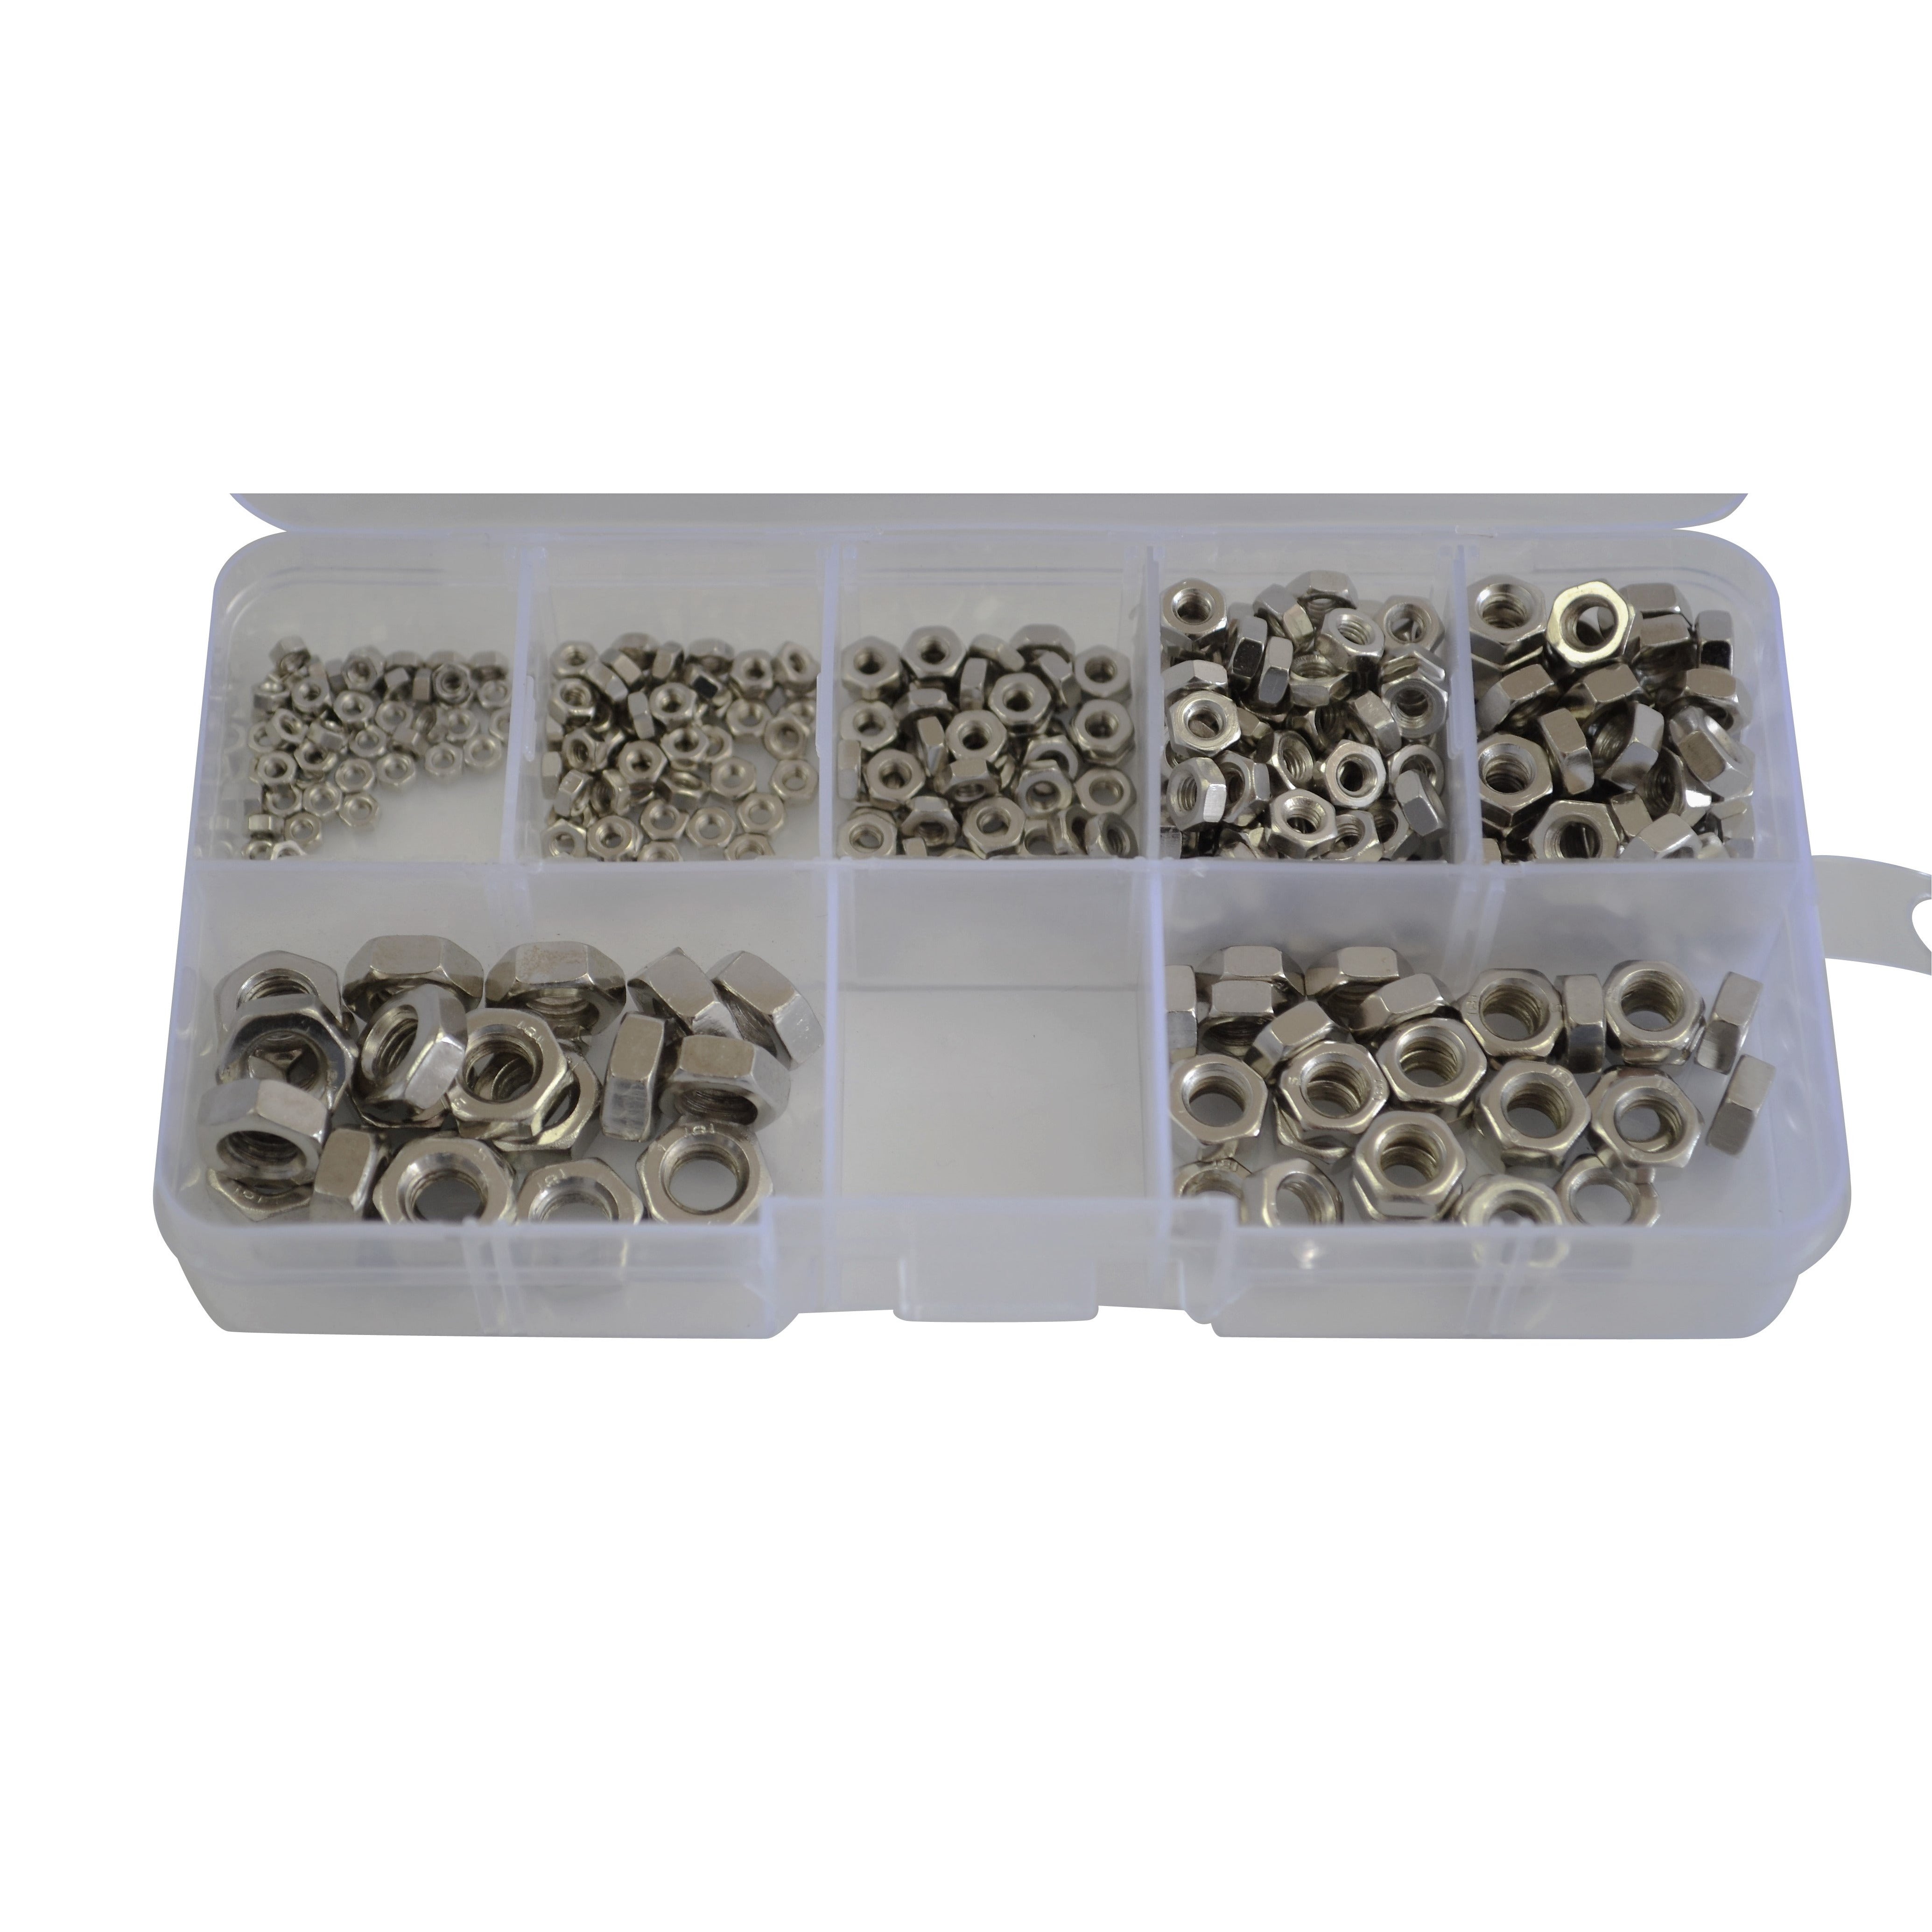 Stainless Steel Hex Nut 350pc Grab Kit Assortment